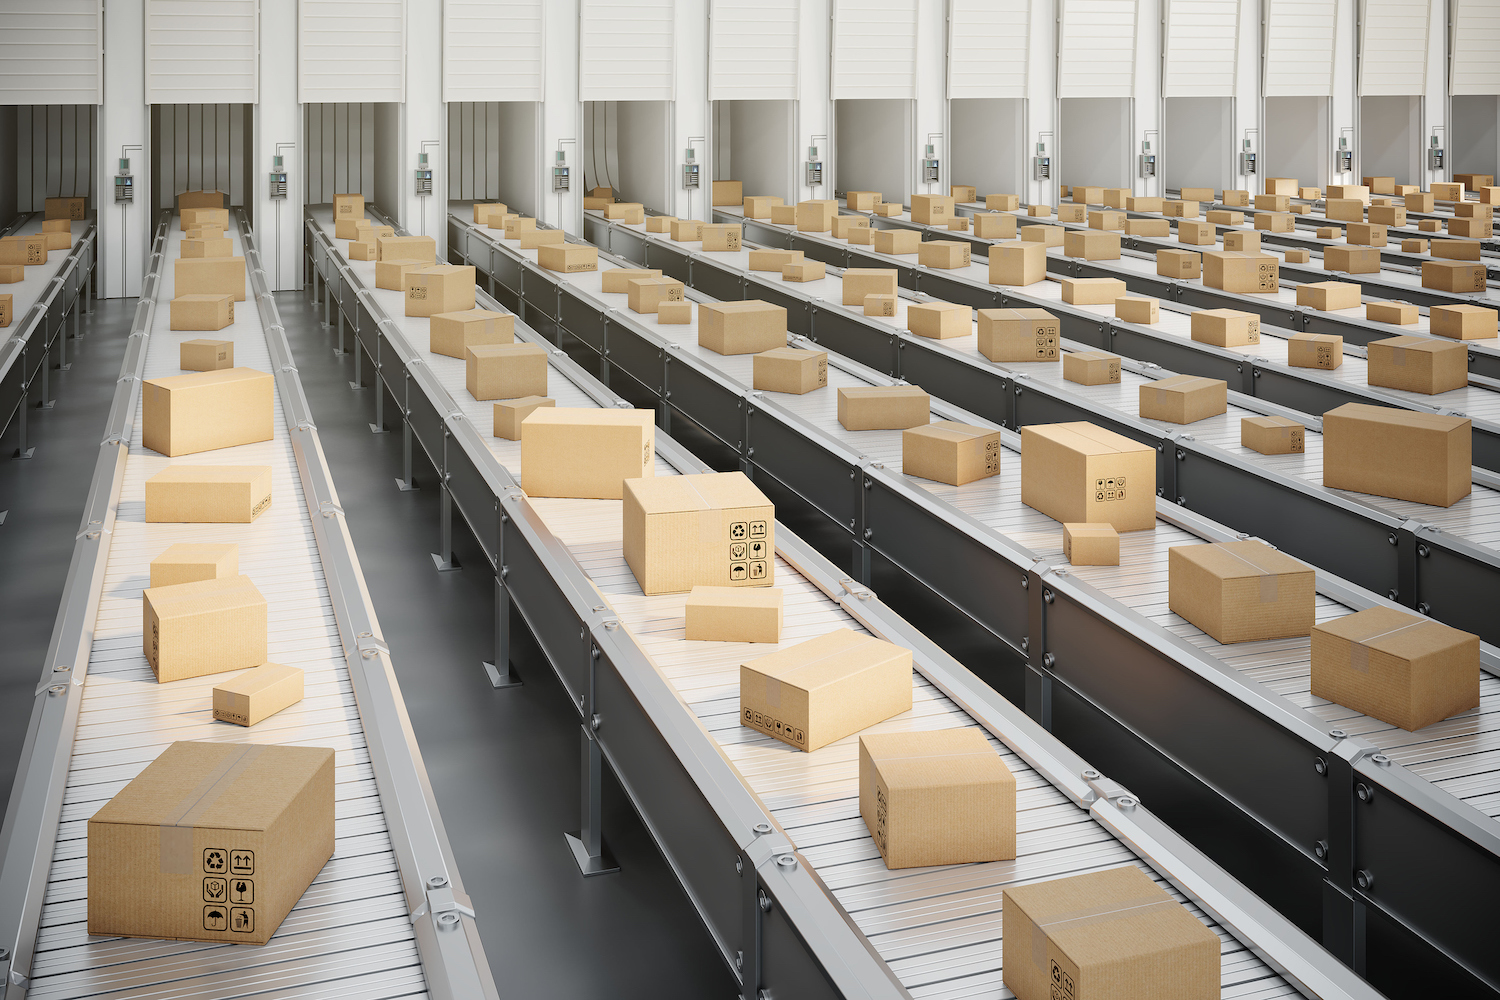 Boxes on a conveyor belt to a shipping distribution warehouse to a truck loading dock.